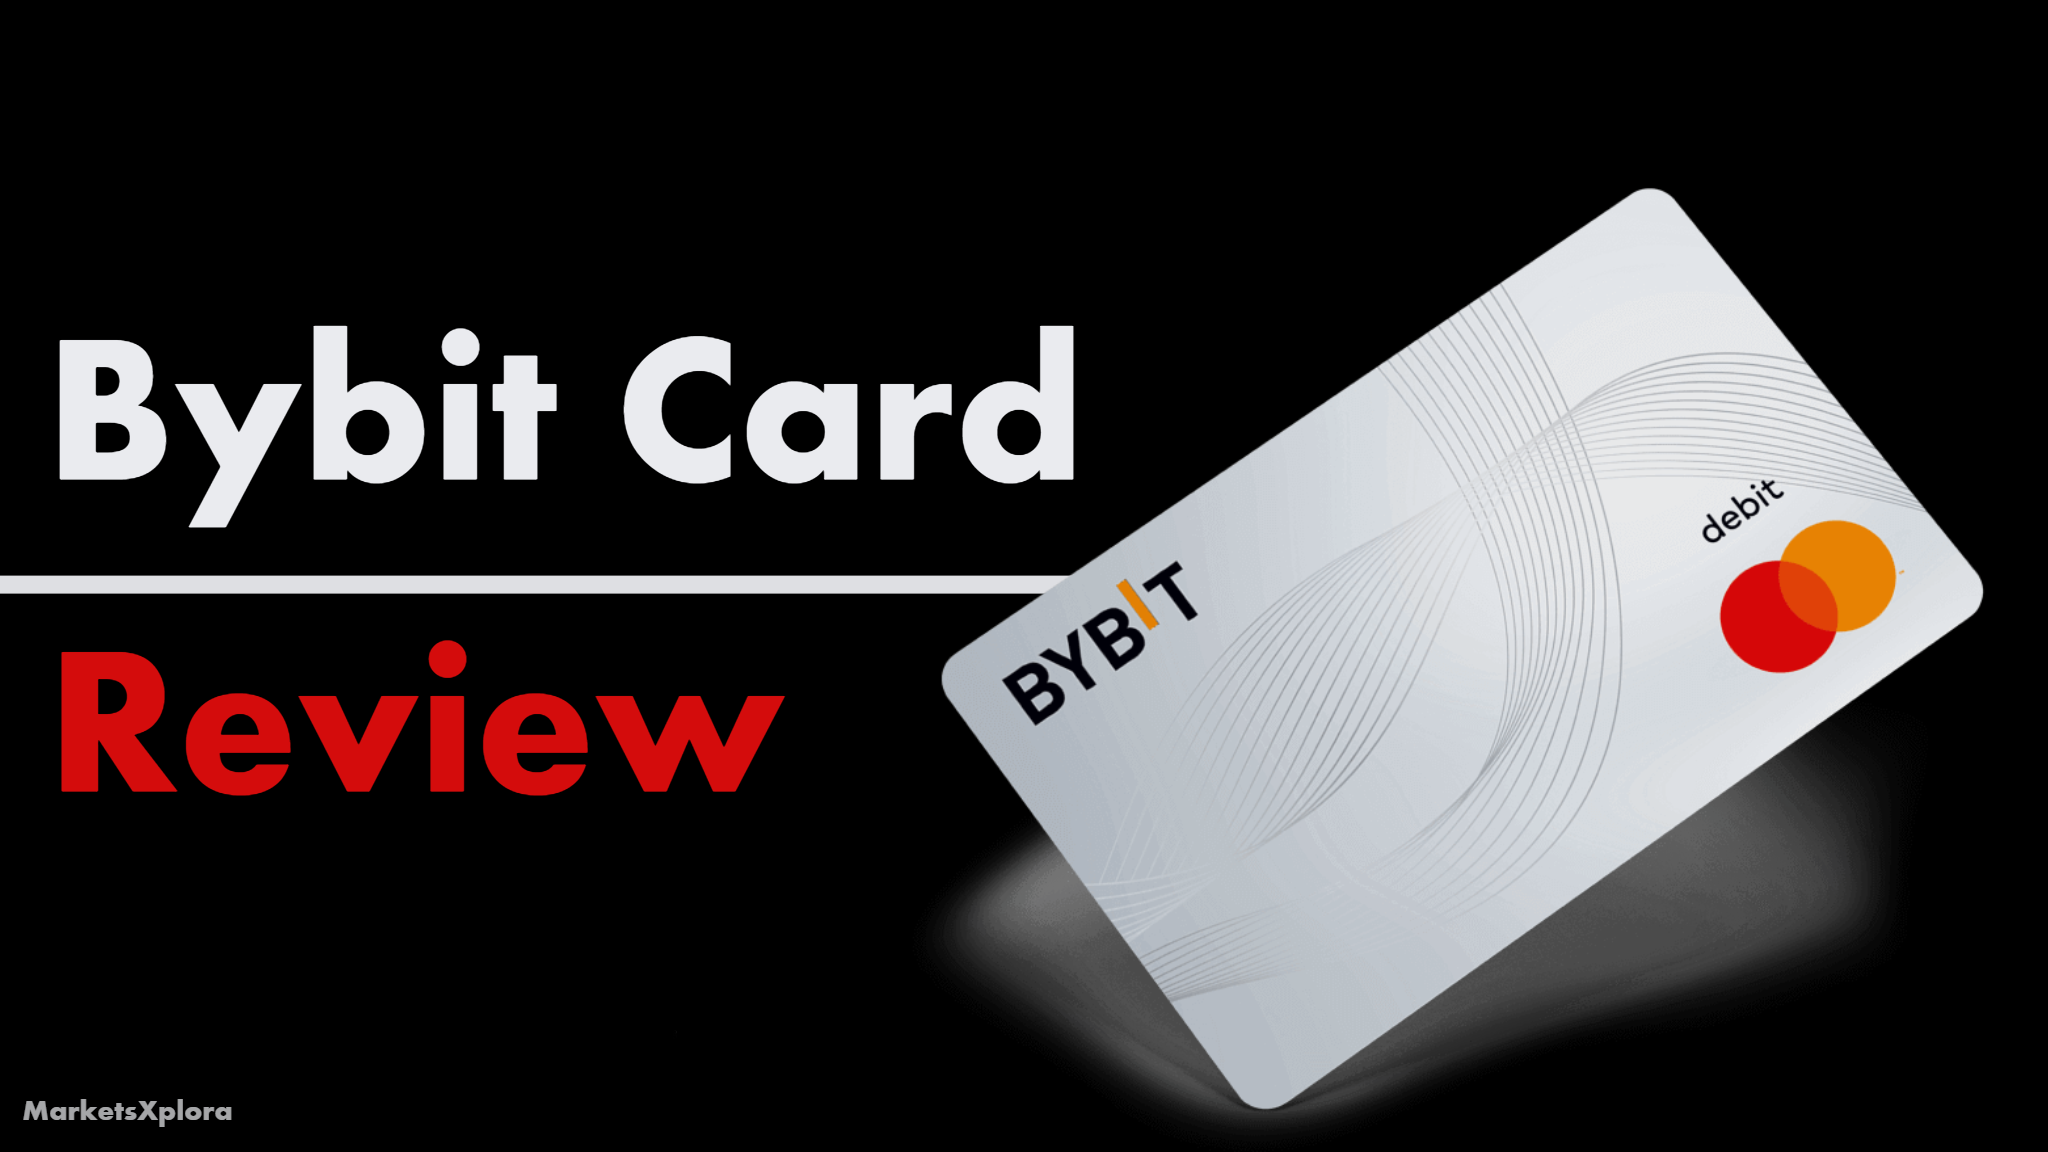 The Bybit Card Review explores this innovative Mastercard that lets you tap into your crypto holdings for everyday transactions with ease and convenience.